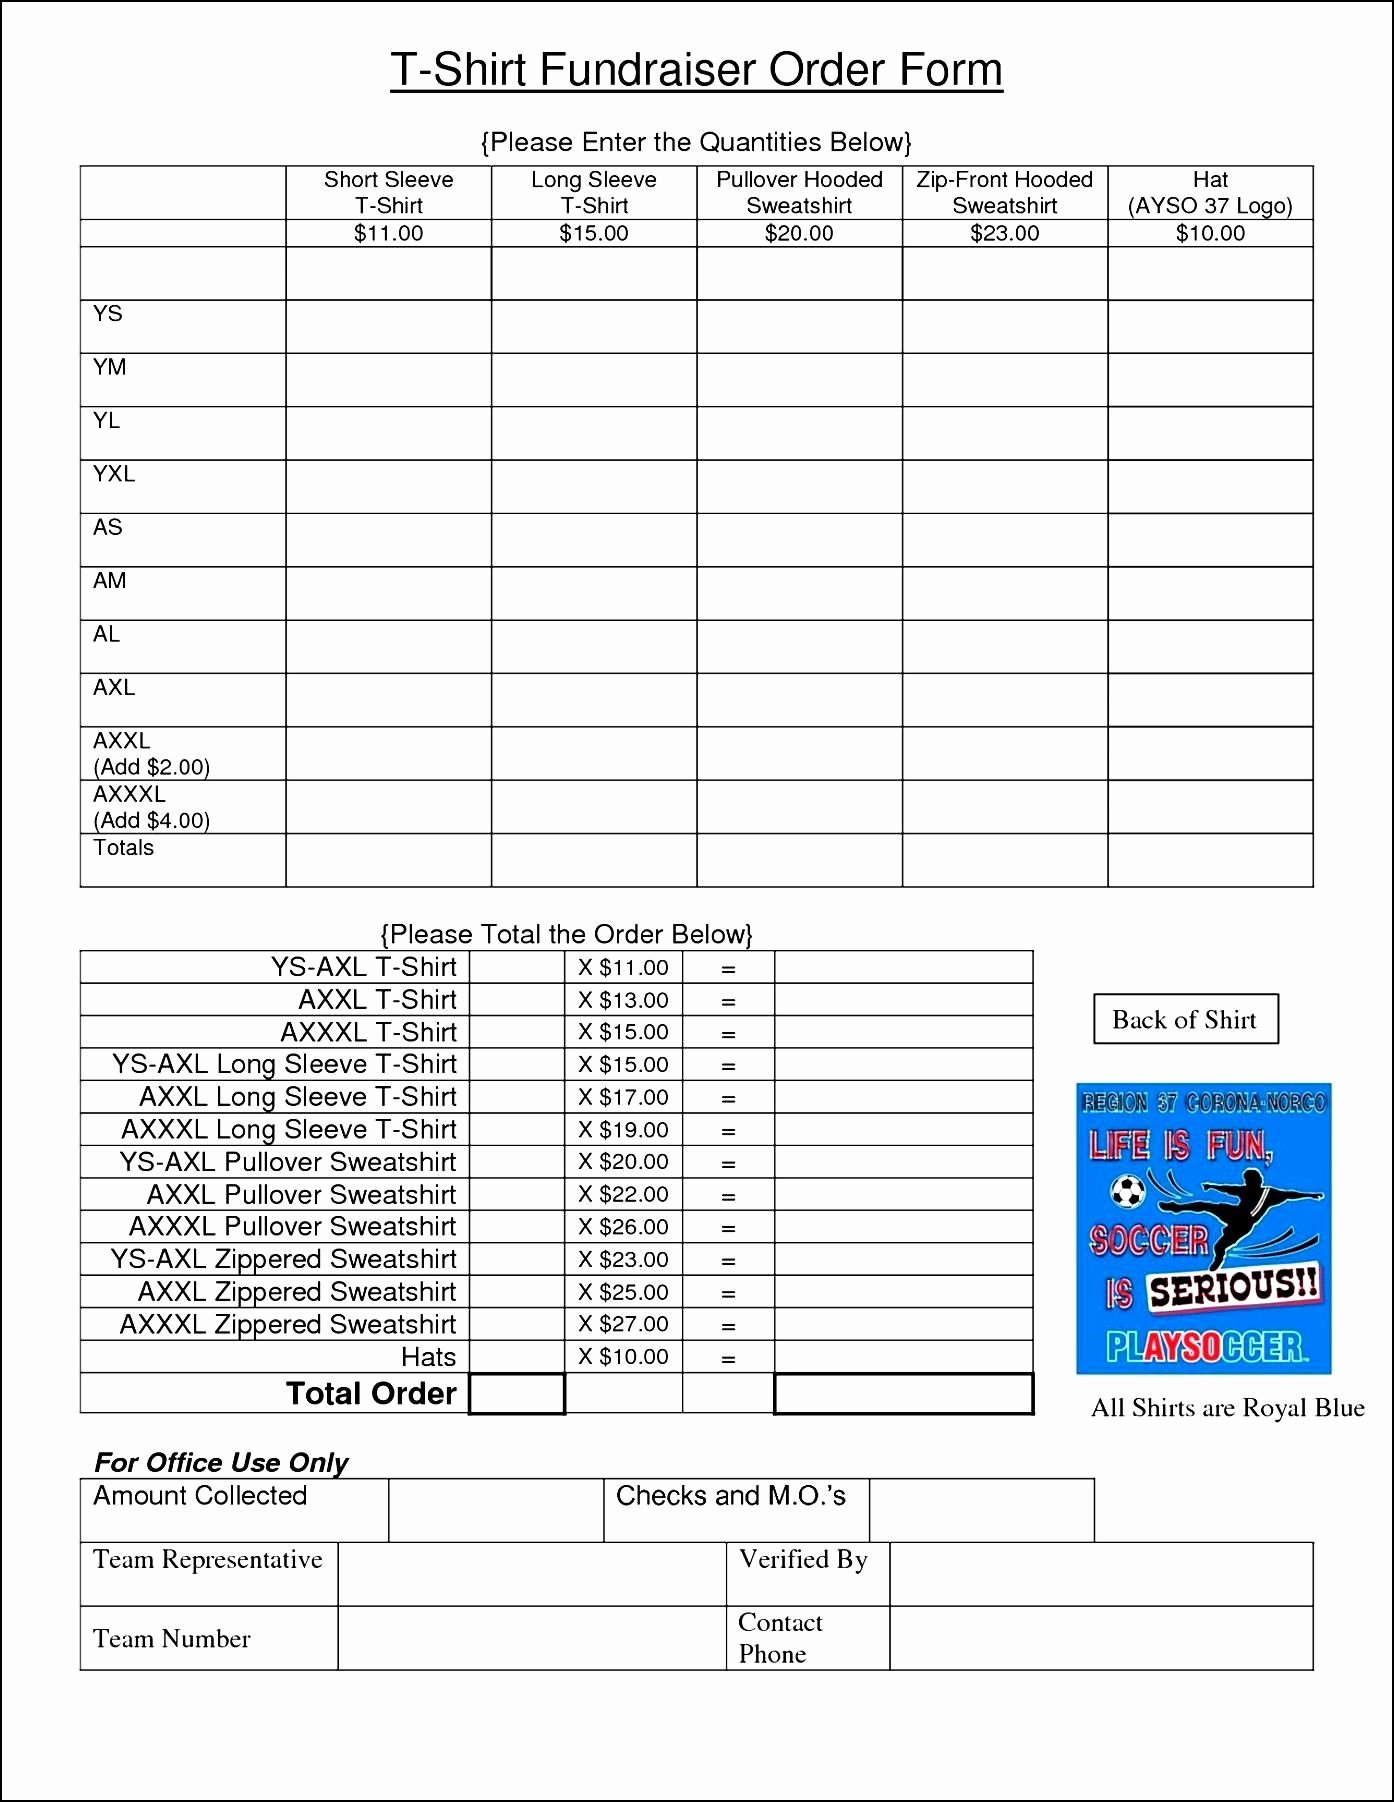 Fundraiser order form Template Free Awesome T Shirt Fundraiser order form Template